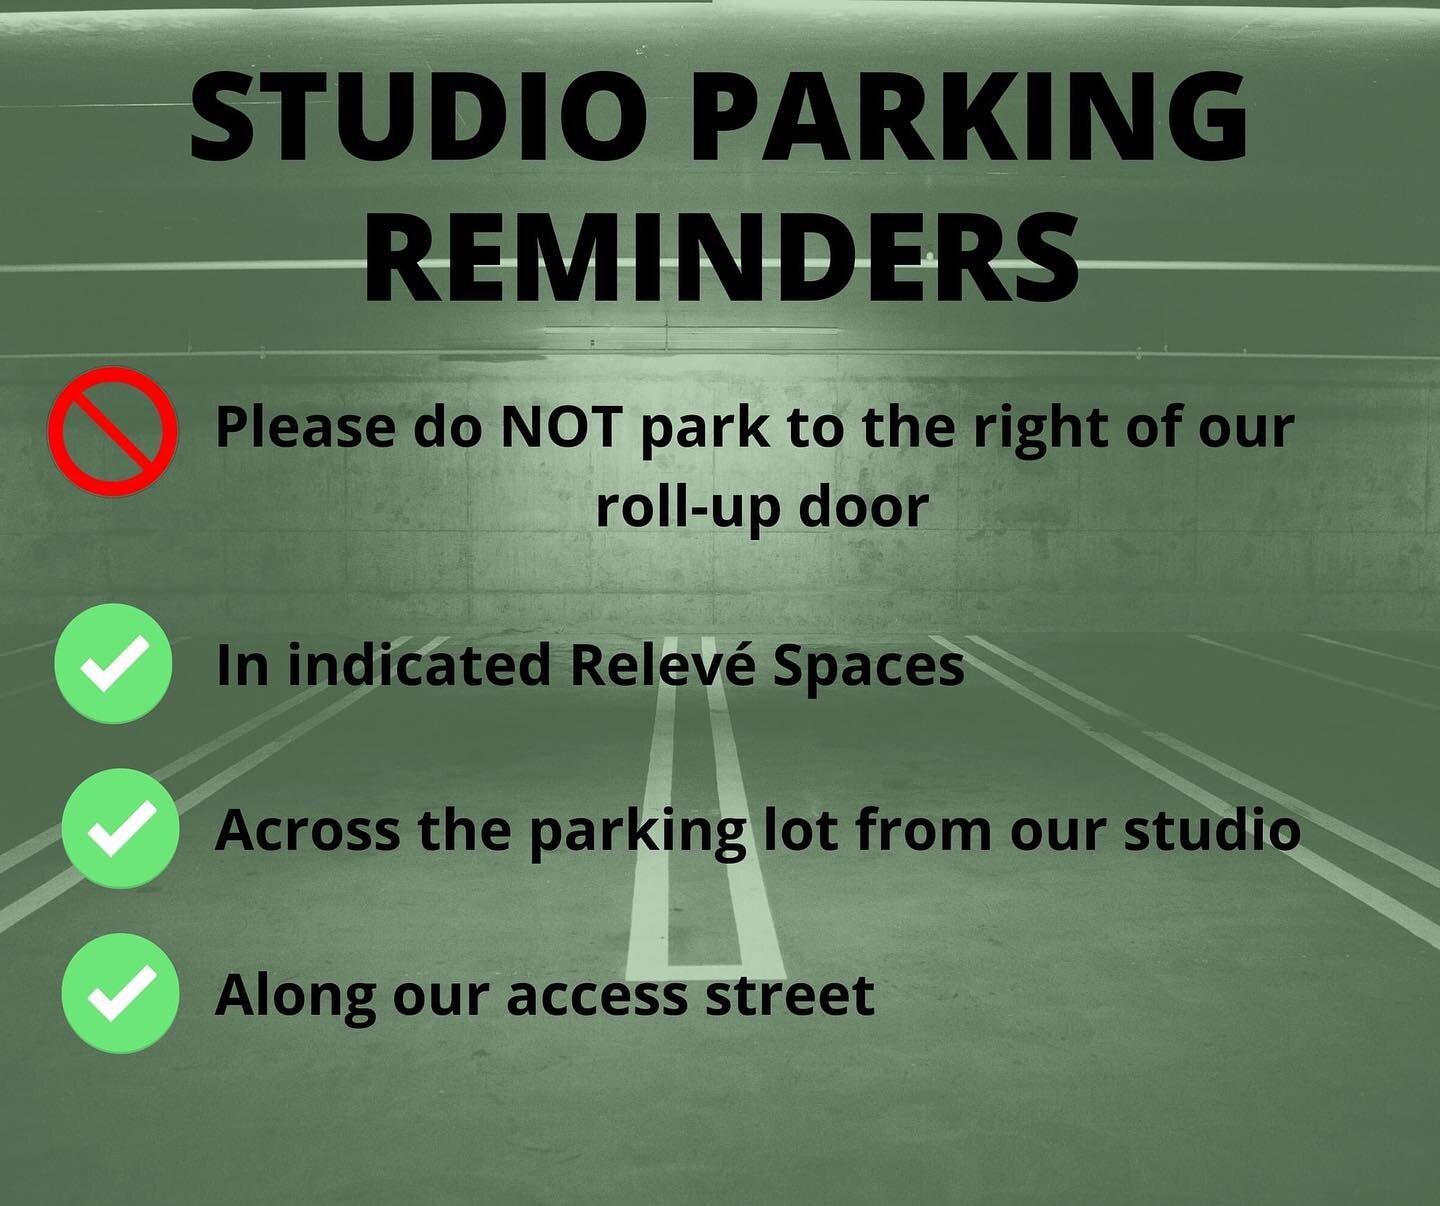 STUDIO PARKING REMINDER! 
We realize that parking is tight at our new location, and it could pose a potential inconvenience from time to time, but we politely ask that you please do not park to the right of our studio roll-up door.  Our wonderful nei